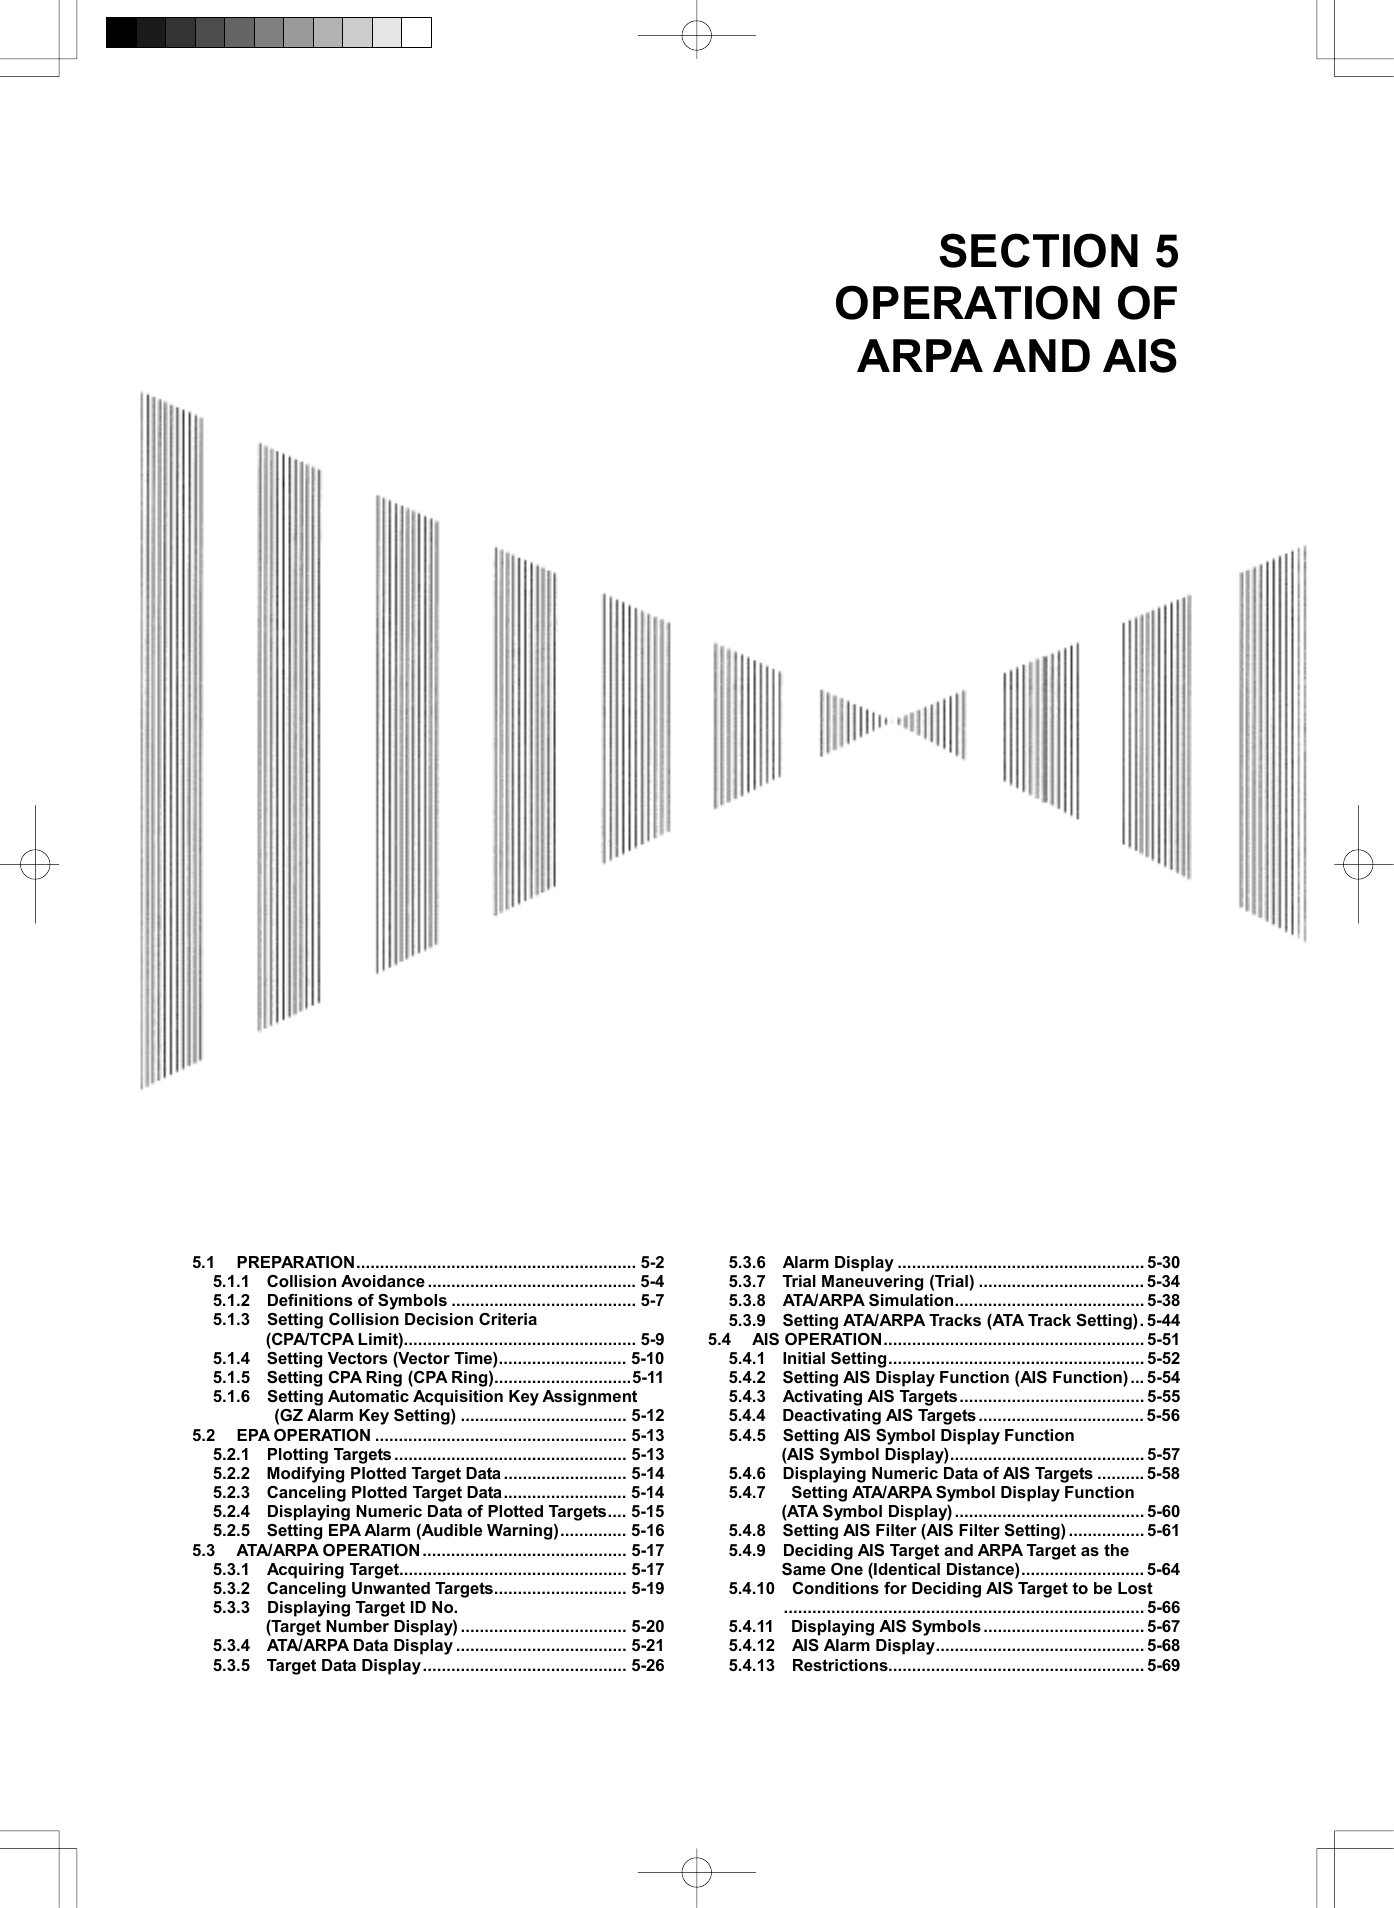   SECTION 5 OPERATION OF ARPA AND AIS       5.1 PREPARATION........................................................... 5-2 5.1.1  Collision Avoidance ............................................ 5-4 5.1.2  Definitions of Symbols ....................................... 5-7 5.1.3    Setting Collision Decision Criteria   (CPA/TCPA Limit)................................................. 5-9 5.1.4  Setting Vectors (Vector Time)........................... 5-10 5.1.5    Setting CPA Ring (CPA Ring).............................5-11 5.1.6    Setting Automatic Acquisition Key Assignment   (GZ Alarm Key Setting) ................................... 5-12 5.2 EPA OPERATION ..................................................... 5-13 5.2.1  Plotting Targets ................................................. 5-13 5.2.2  Modifying Plotted Target Data .......................... 5-14 5.2.3  Canceling Plotted Target Data.......................... 5-14 5.2.4    Displaying Numeric Data of Plotted Targets.... 5-15 5.2.5    Setting EPA Alarm (Audible Warning).............. 5-16 5.3 ATA/ARPA OPERATION........................................... 5-17 5.3.1  Acquiring Target................................................ 5-17 5.3.2    Canceling Unwanted Targets............................ 5-19 5.3.3    Displaying Target ID No.   (Target Number Display) ................................... 5-20 5.3.4  ATA/ARPA Data Display .................................... 5-21 5.3.5  Target Data Display........................................... 5-26 5.3.6  Alarm Display .................................................... 5-30 5.3.7  Trial Maneuvering (Trial) ................................... 5-34 5.3.8  ATA/ARPA Simulation........................................ 5-38 5.3.9    Setting ATA/ARPA Tracks (ATA Track Setting). 5-44 5.4 AIS OPERATION....................................................... 5-51 5.4.1  Initial Setting...................................................... 5-52 5.4.2    Setting AIS Display Function (AIS Function)... 5-54 5.4.3  Activating AIS Targets....................................... 5-55 5.4.4  Deactivating AIS Targets................................... 5-56 5.4.5  Setting AIS Symbol Display Function  (AIS Symbol Display)......................................... 5-57 5.4.6    Displaying Numeric Data of AIS Targets .......... 5-58 5.4.7   Setting ATA/ARPA Symbol Display Function (ATA Symbol Display) ........................................ 5-60 5.4.8    Setting AIS Filter (AIS Filter Setting)................ 5-61 5.4.9    Deciding AIS Target and ARPA Target as the Same One (Identical Distance).......................... 5-64 5.4.10  Conditions for Deciding AIS Target to be Lost ............................................................................ 5-66 5.4.11  Displaying AIS Symbols.................................. 5-67 5.4.12  AIS Alarm Display............................................ 5-68 5.4.13  Restrictions...................................................... 5-69 